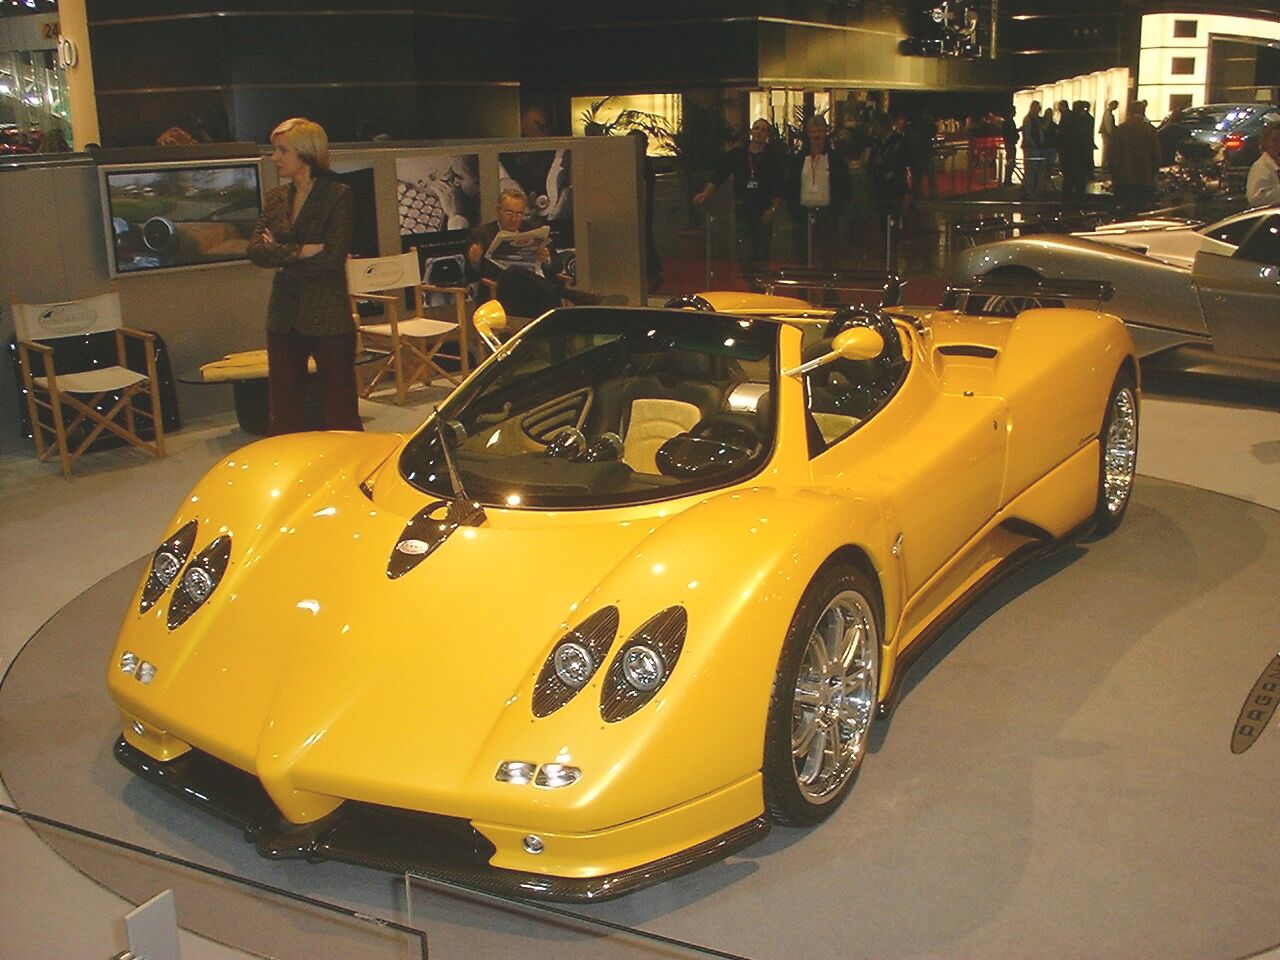 the new Pagani Zonda Roadster received its world premiere at the Geneva Motor Show this week